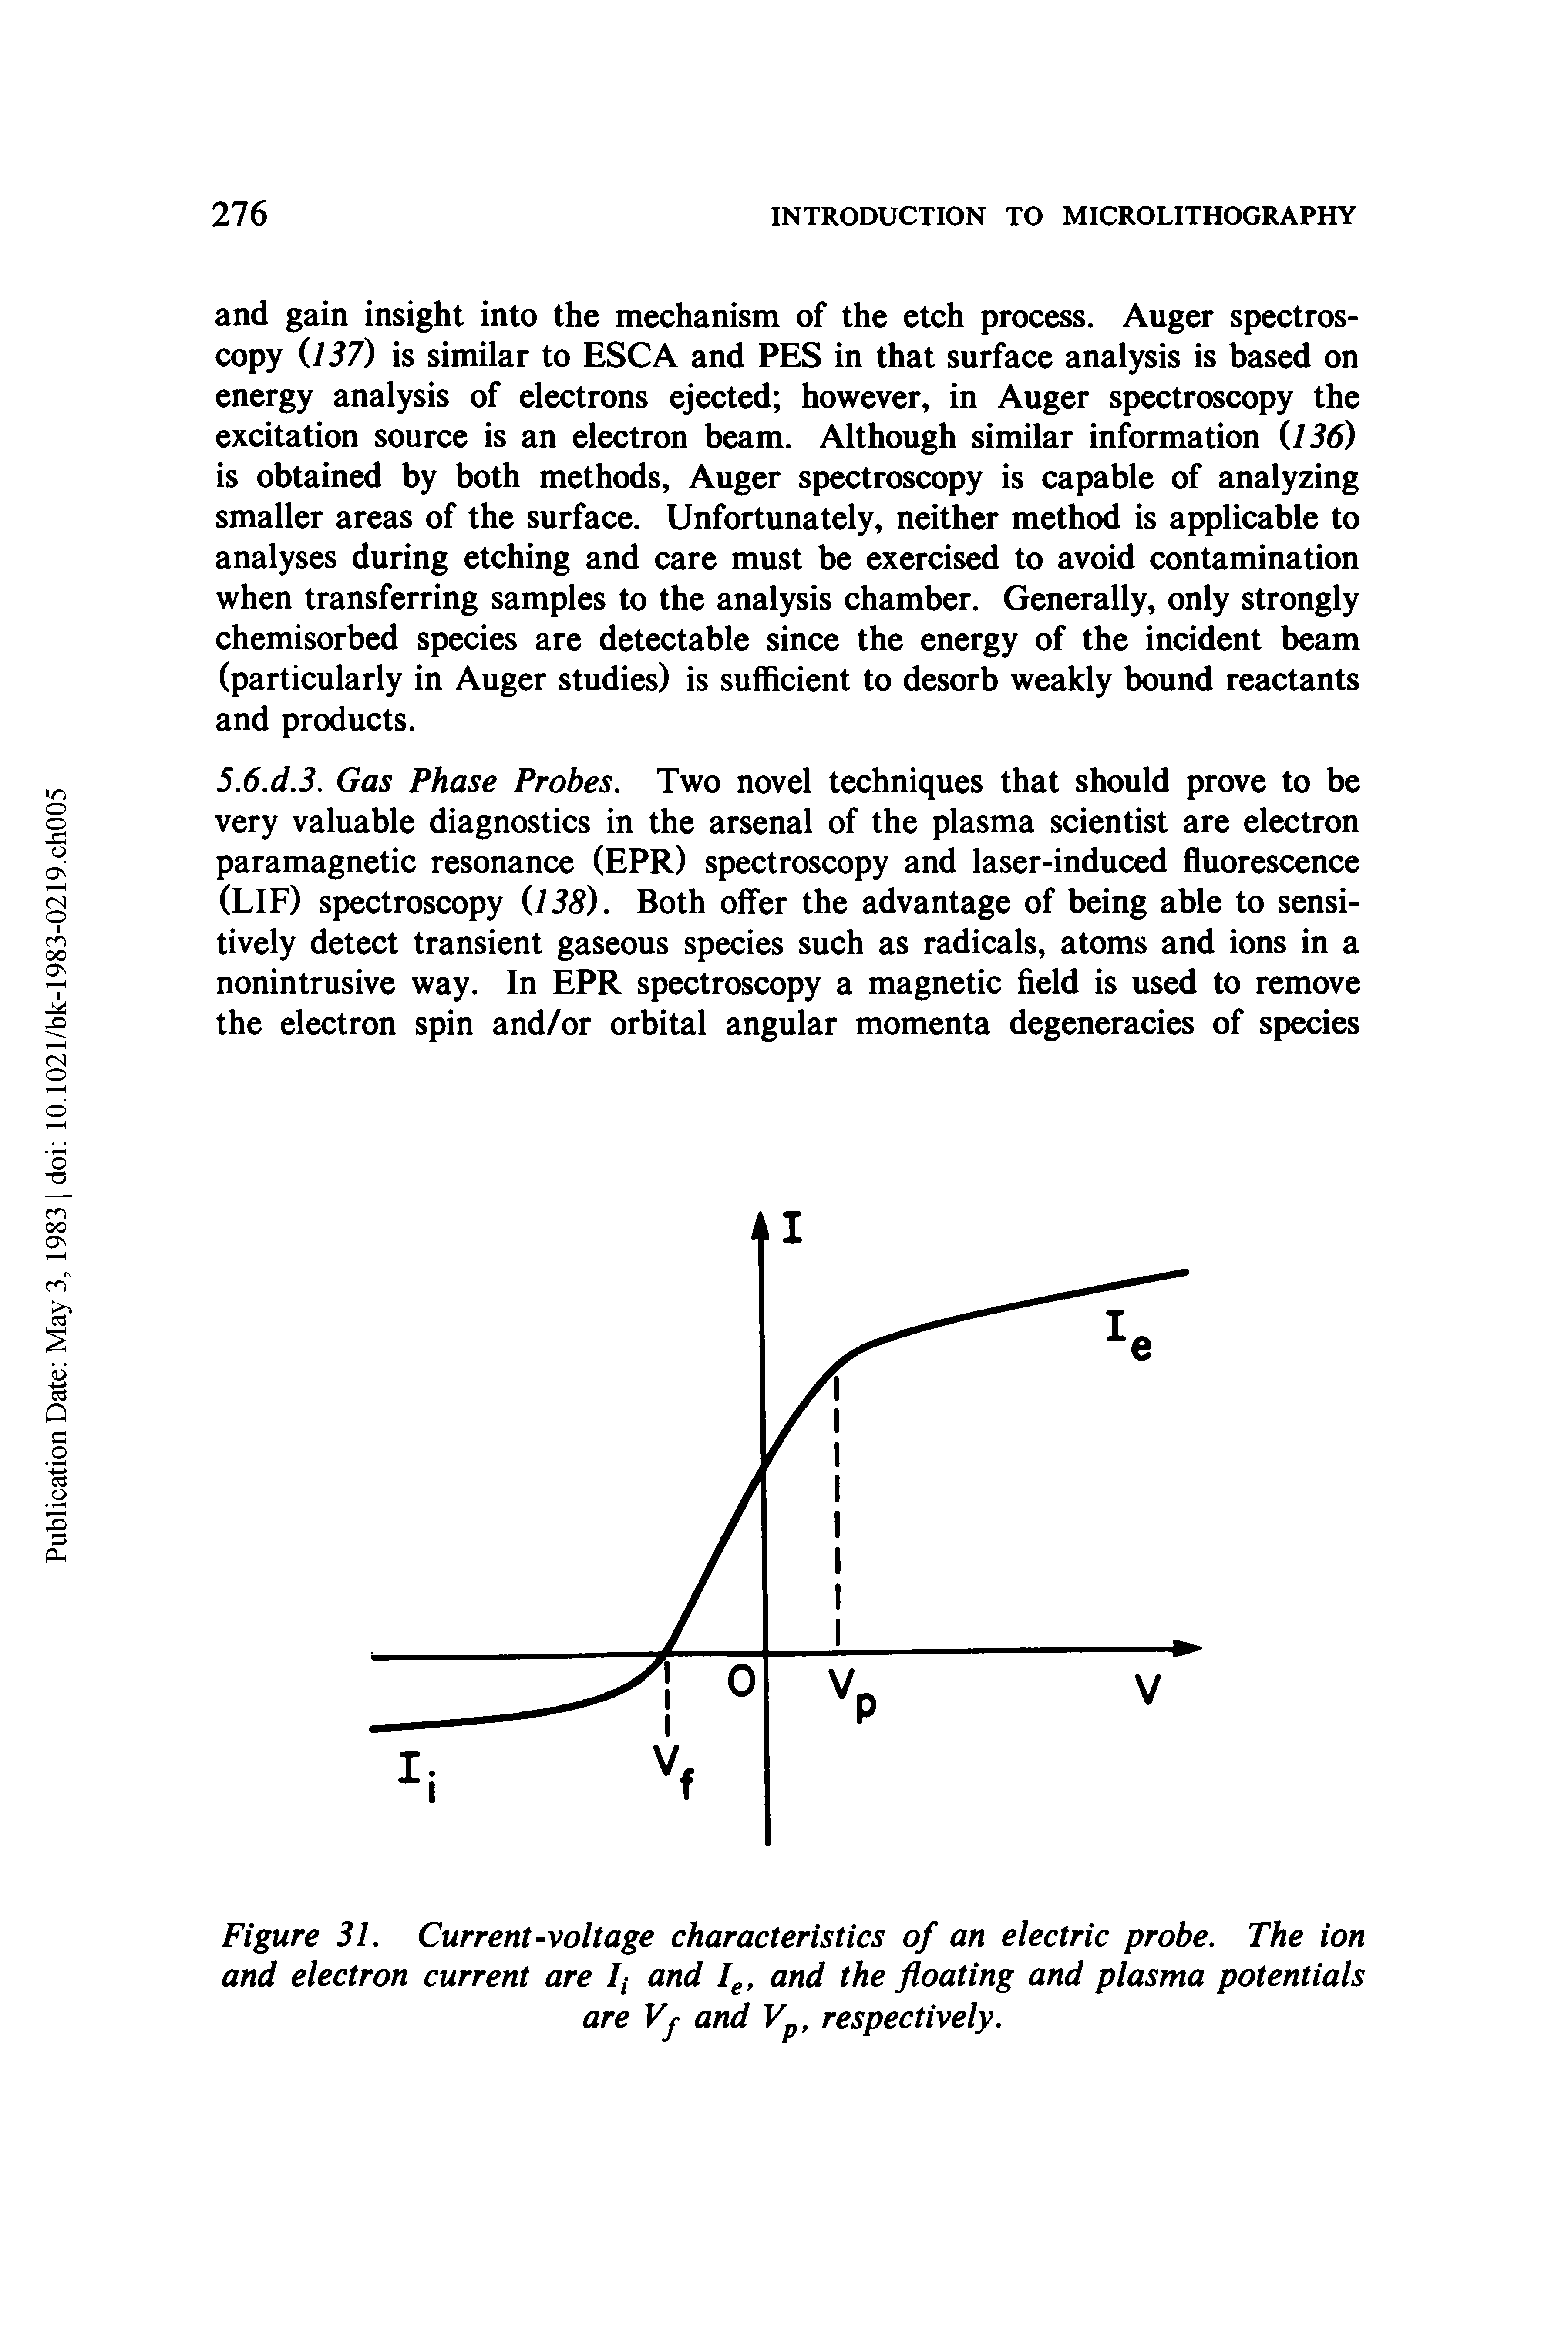 Figure 31. Current-voltage characteristics of an electric probe. The ion and electron current are f and 1, and the floating and plasma potentials are Vf and Vp, respectively.